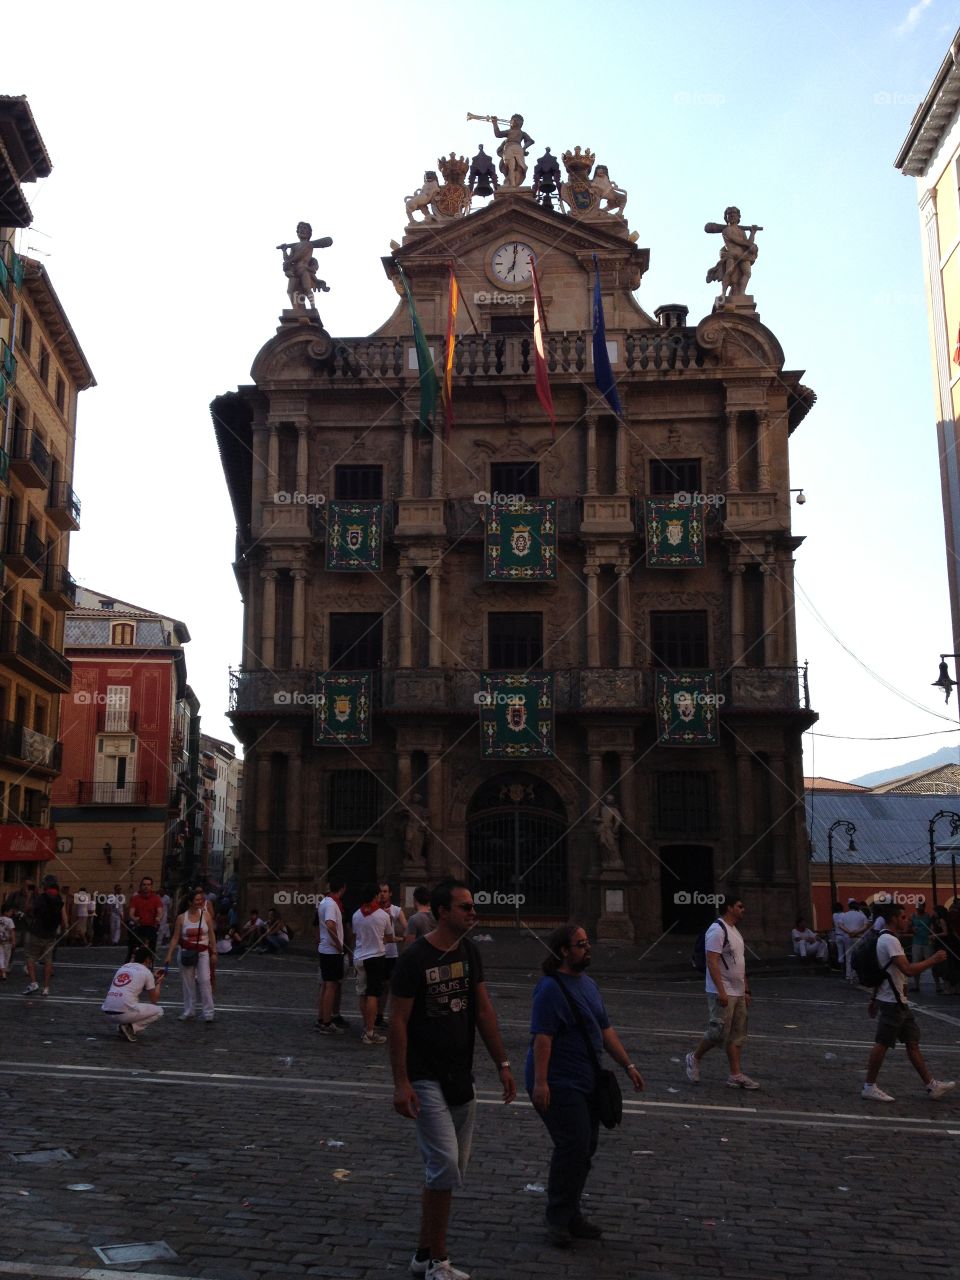 Townhall in Pamplona, Spain for the running of the bulls